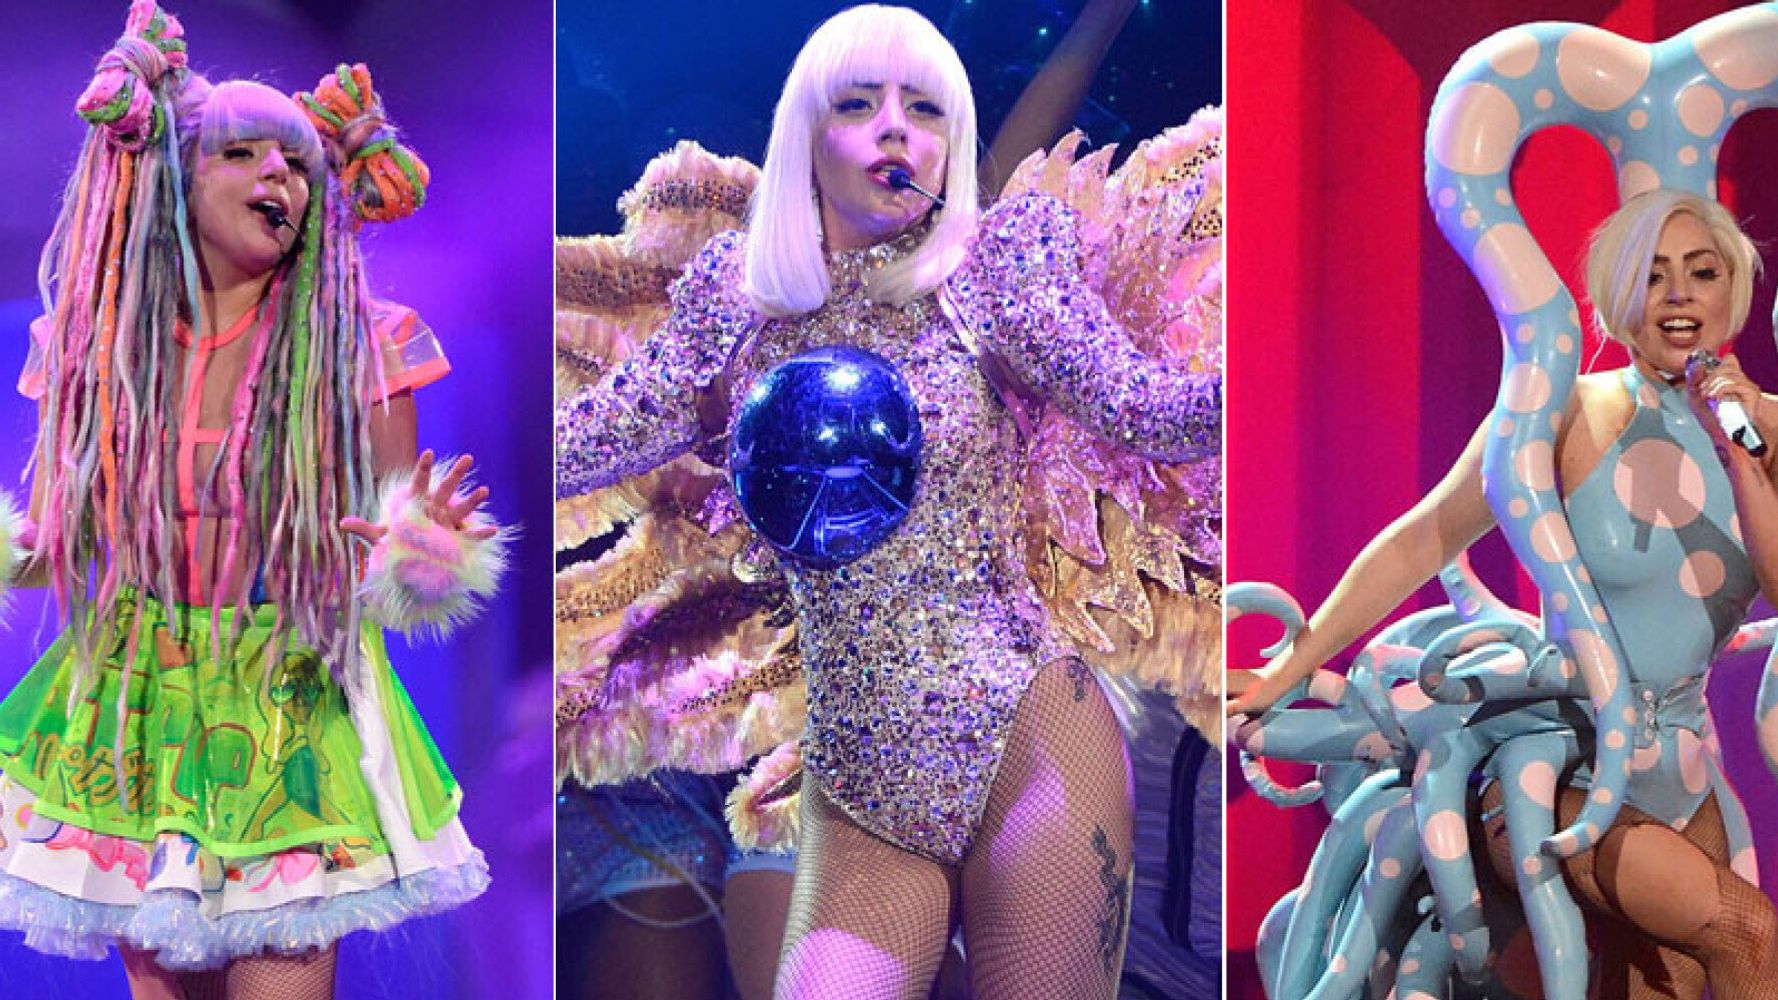 Lady Gaga Artrave Tour Singer Wears Her Weirdest Outfits Yet And